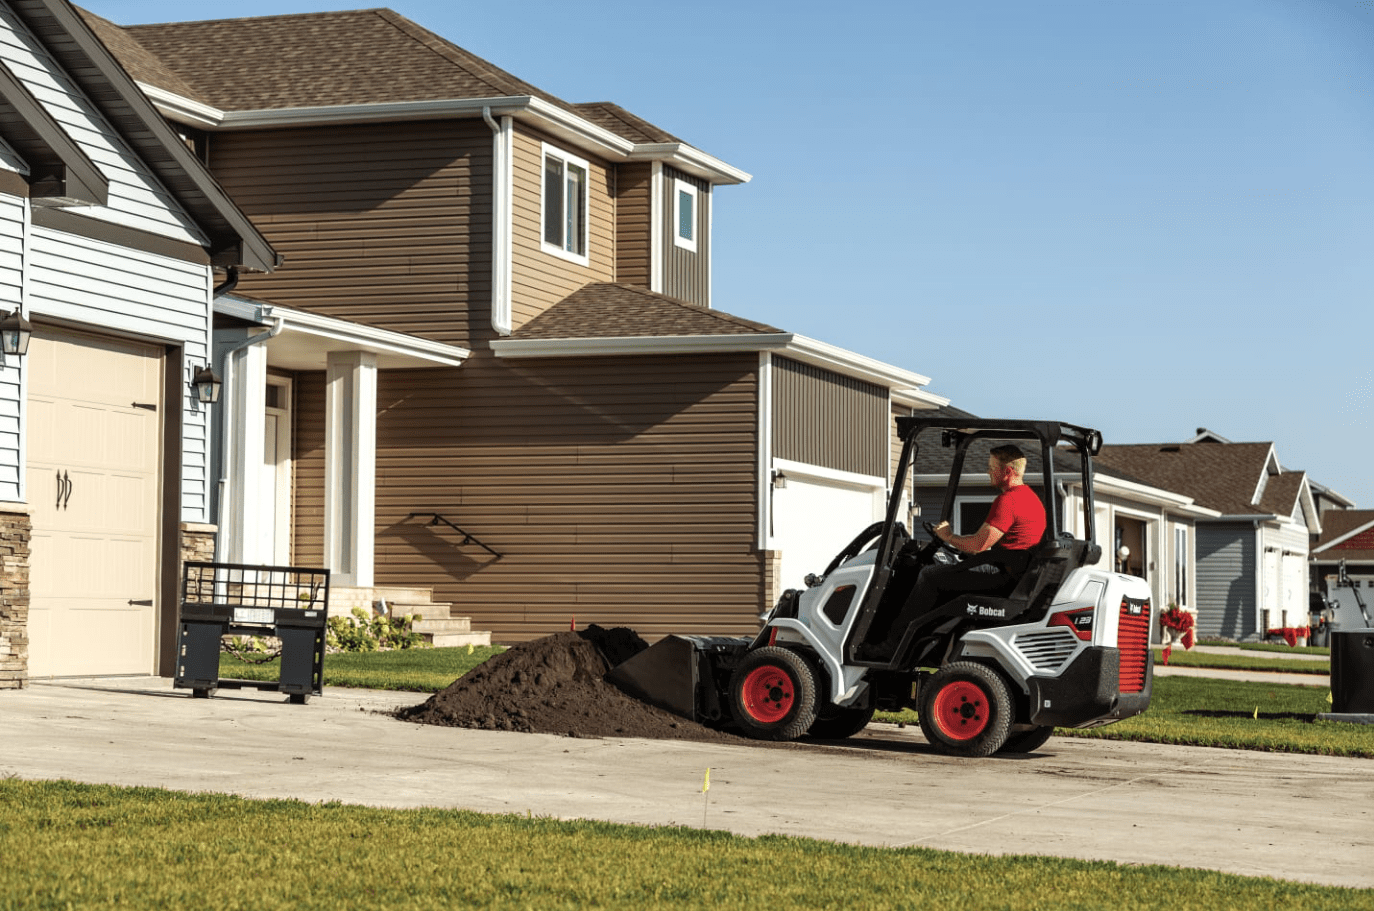 Browse Specs and more for the Bobcat L23 Small Articulated Loader - Bobcat of the Rockies